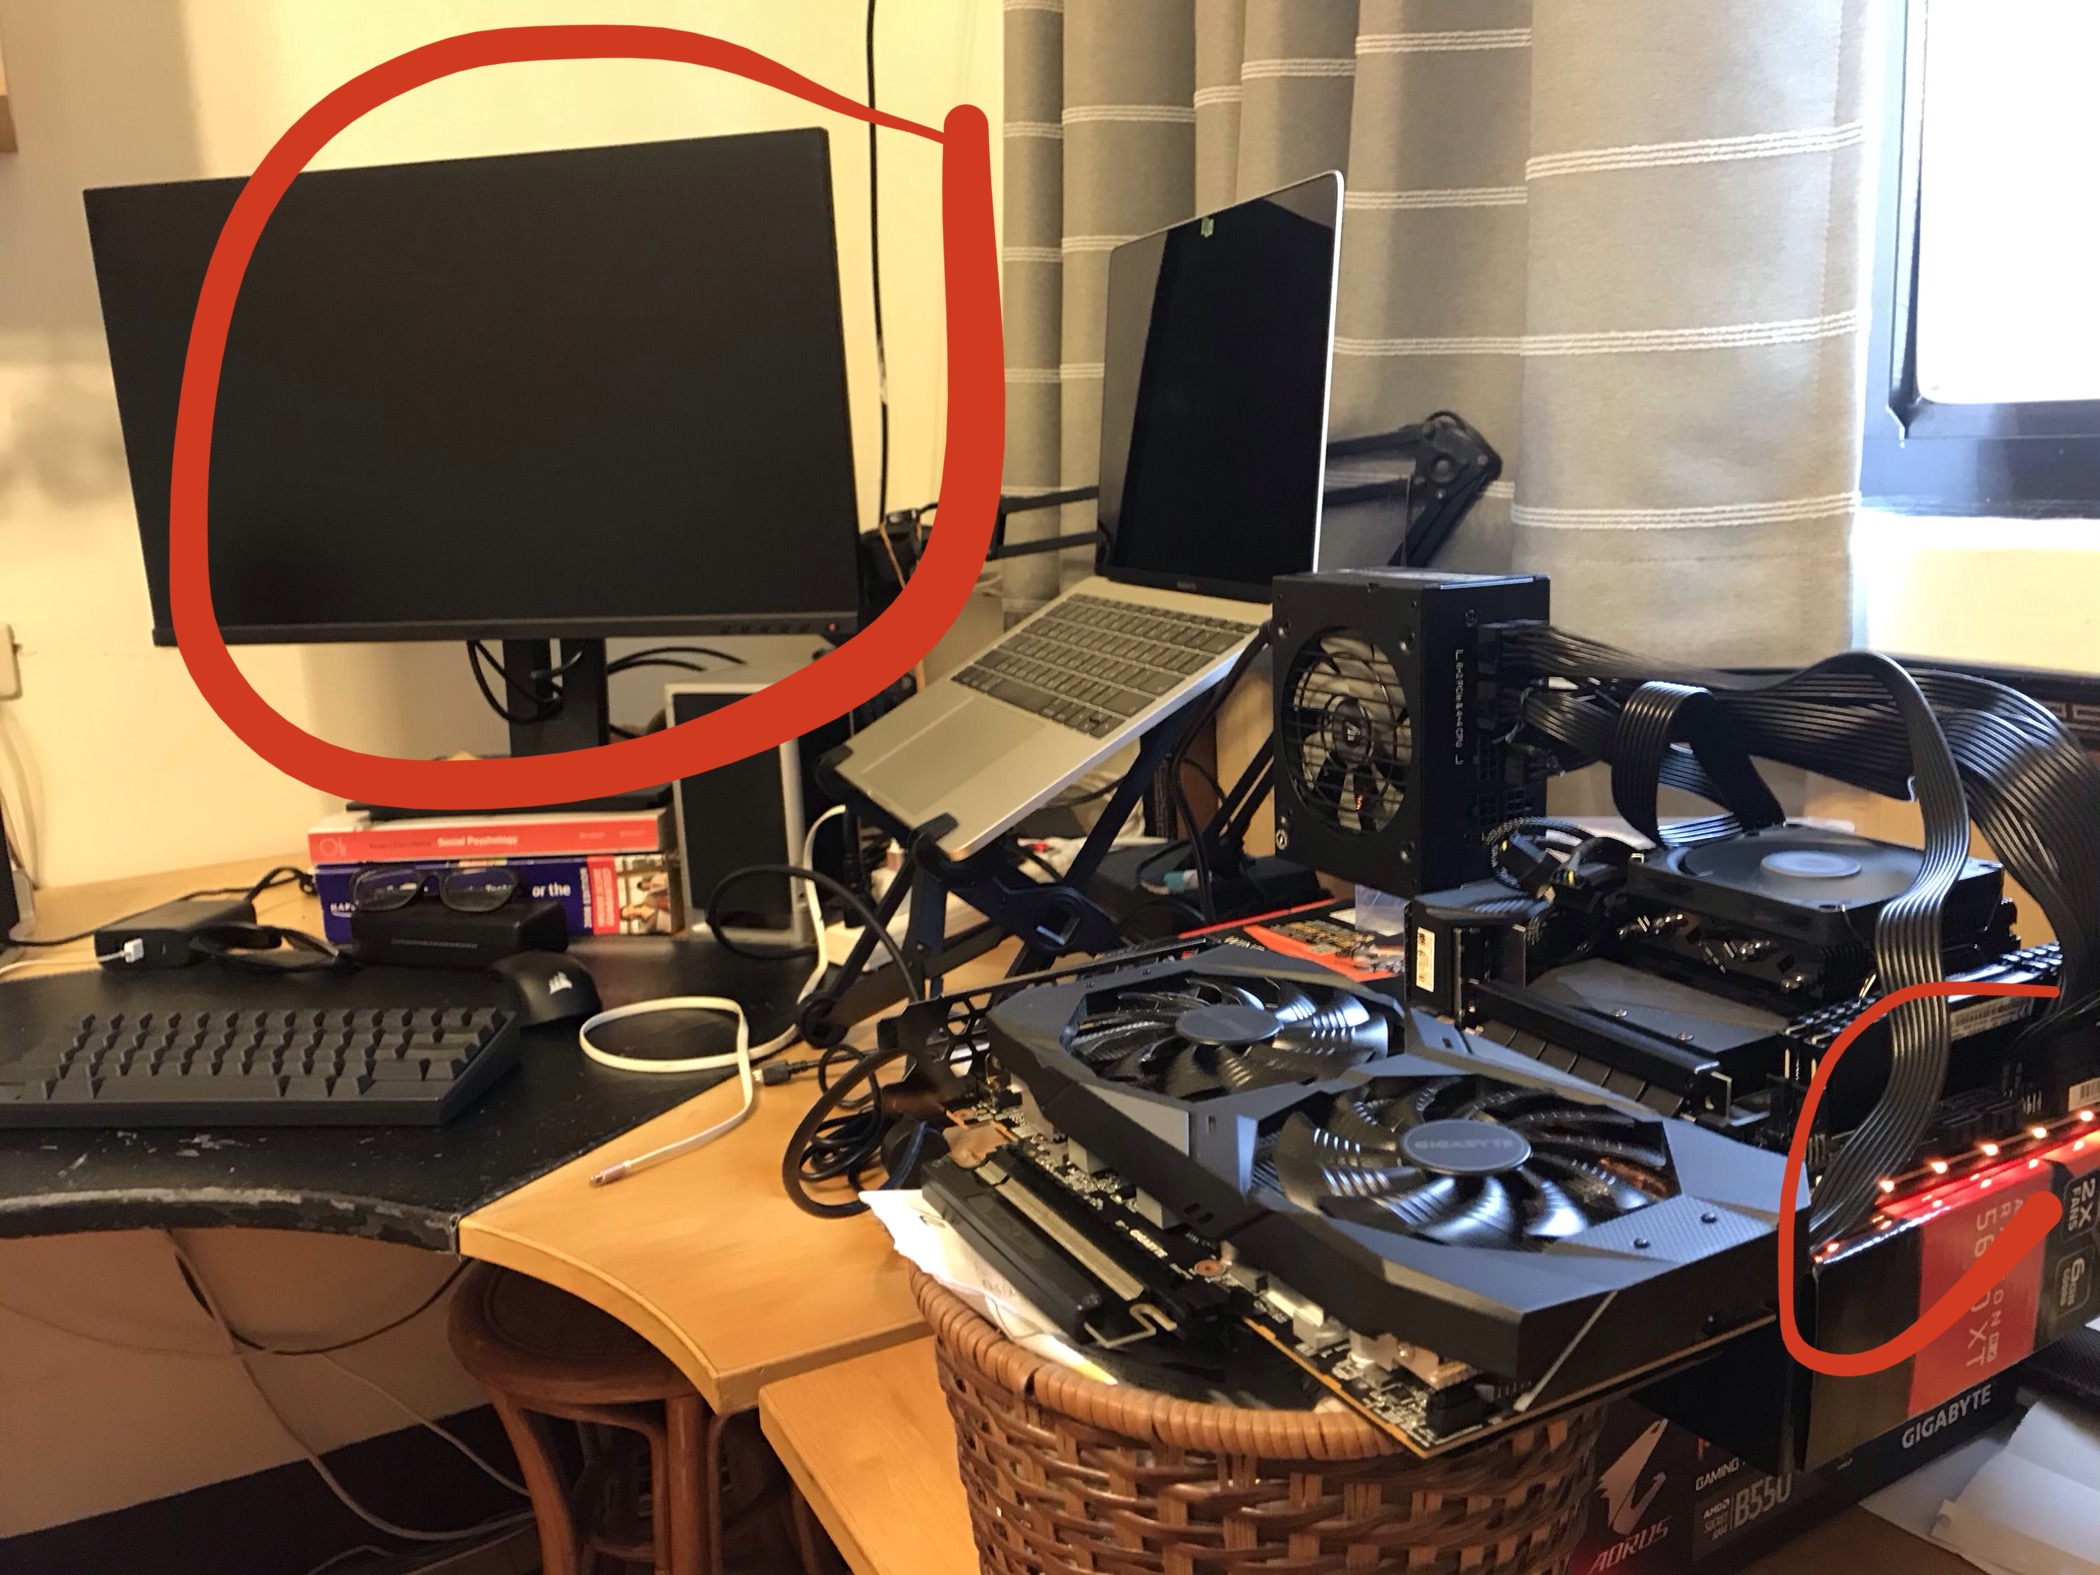 GPU does not work on extension cord